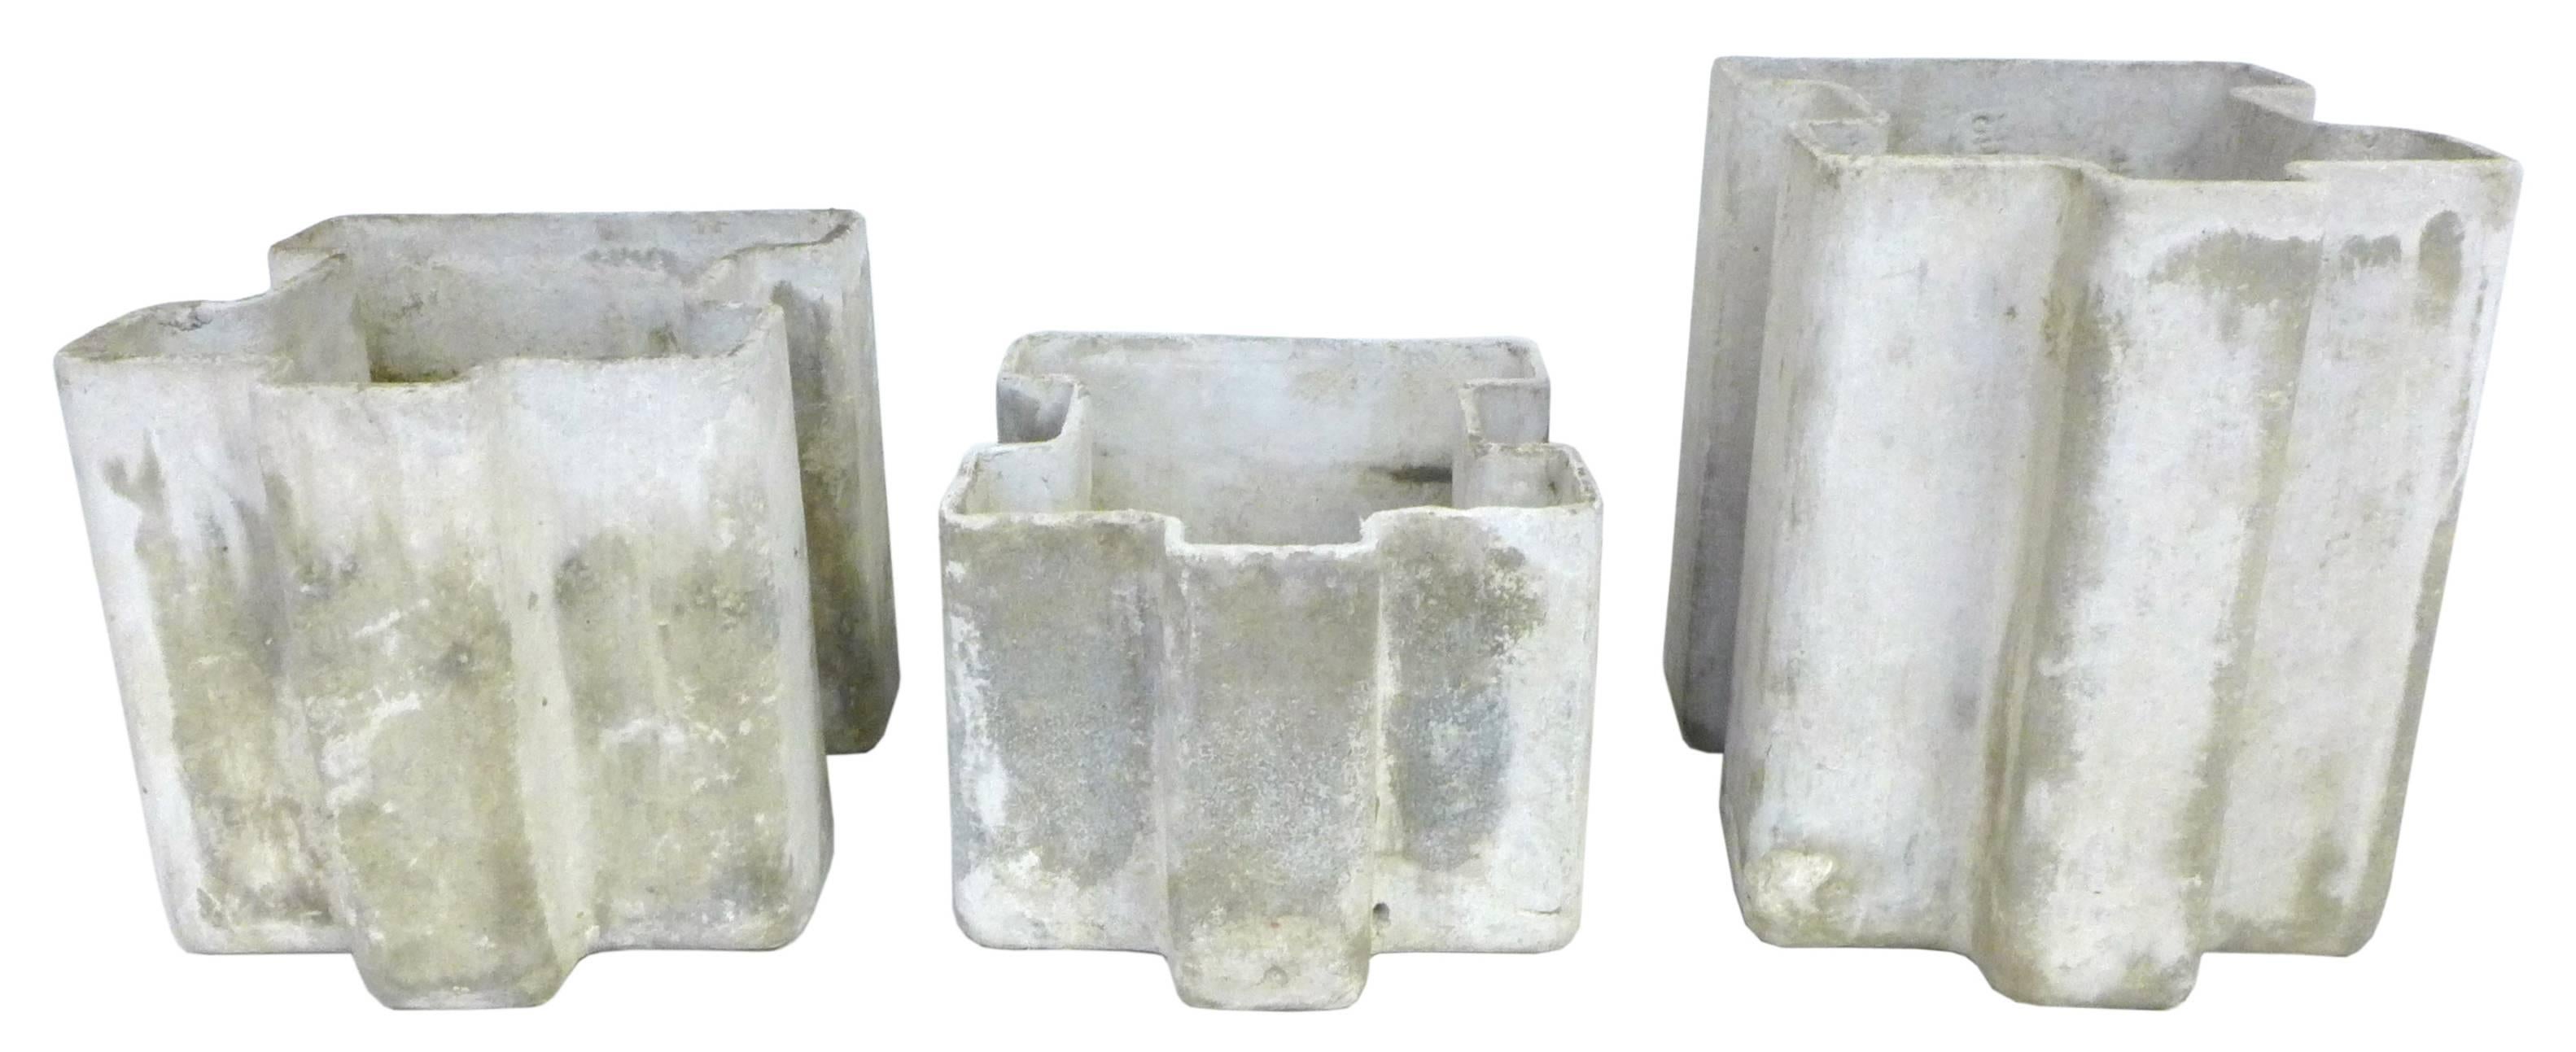 A wonderful trio of cast fibercrete planters. A fantastic, compact, unexpected geometric form seemingly extruded to three different heights. Each planter wearing a perfect, much-desired patina from years of life outdoors. Very much in the style and